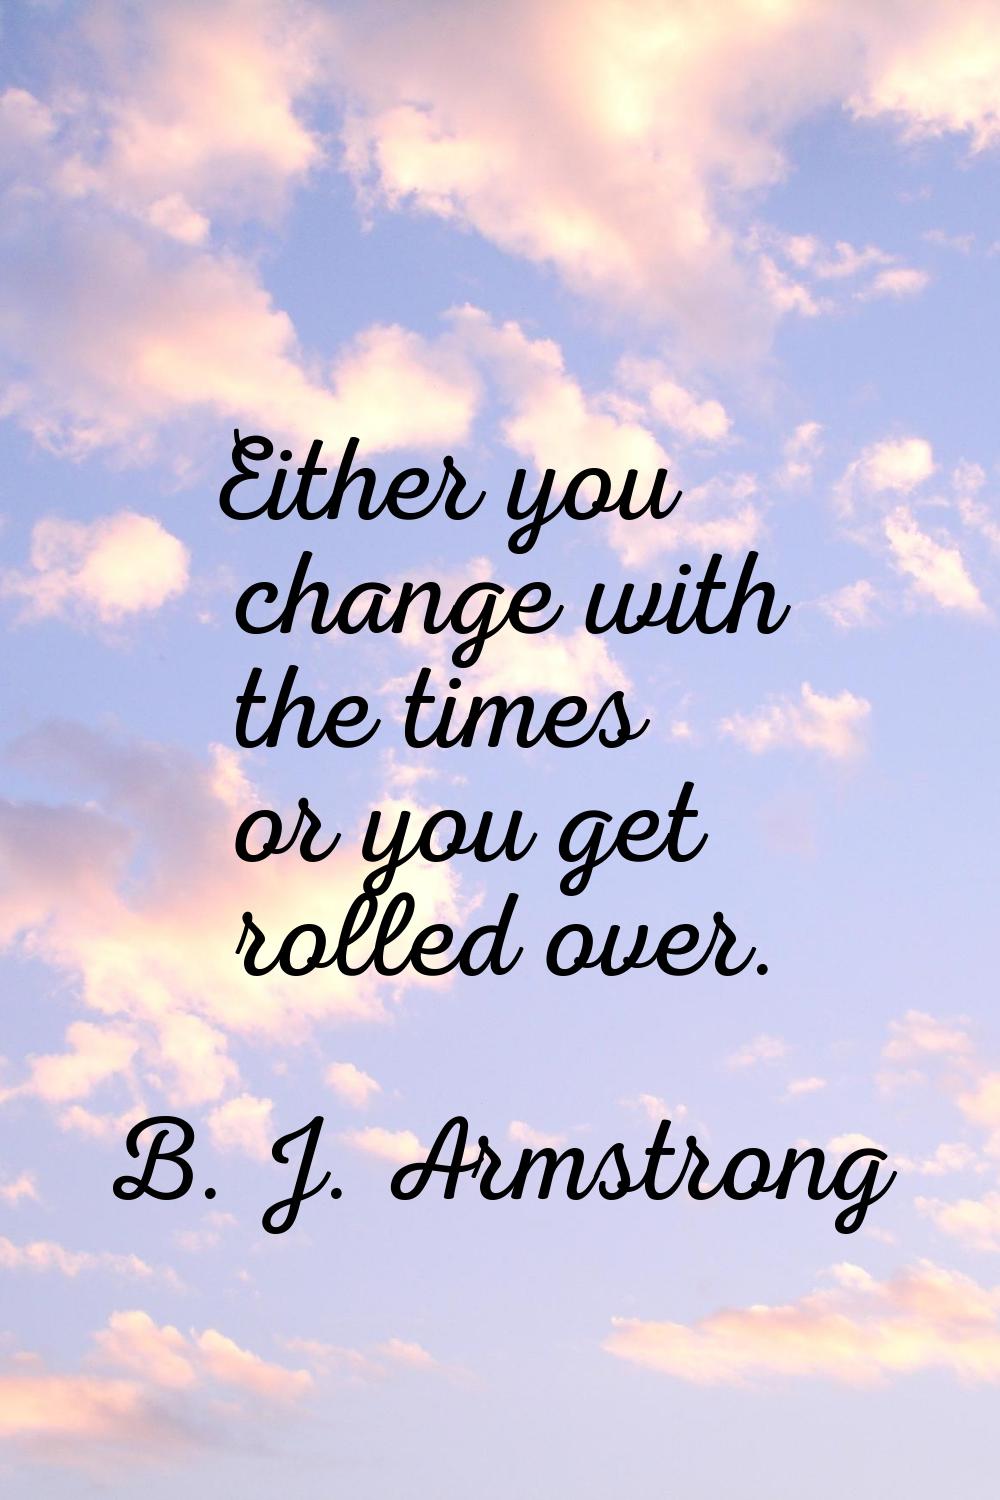 Either you change with the times or you get rolled over.